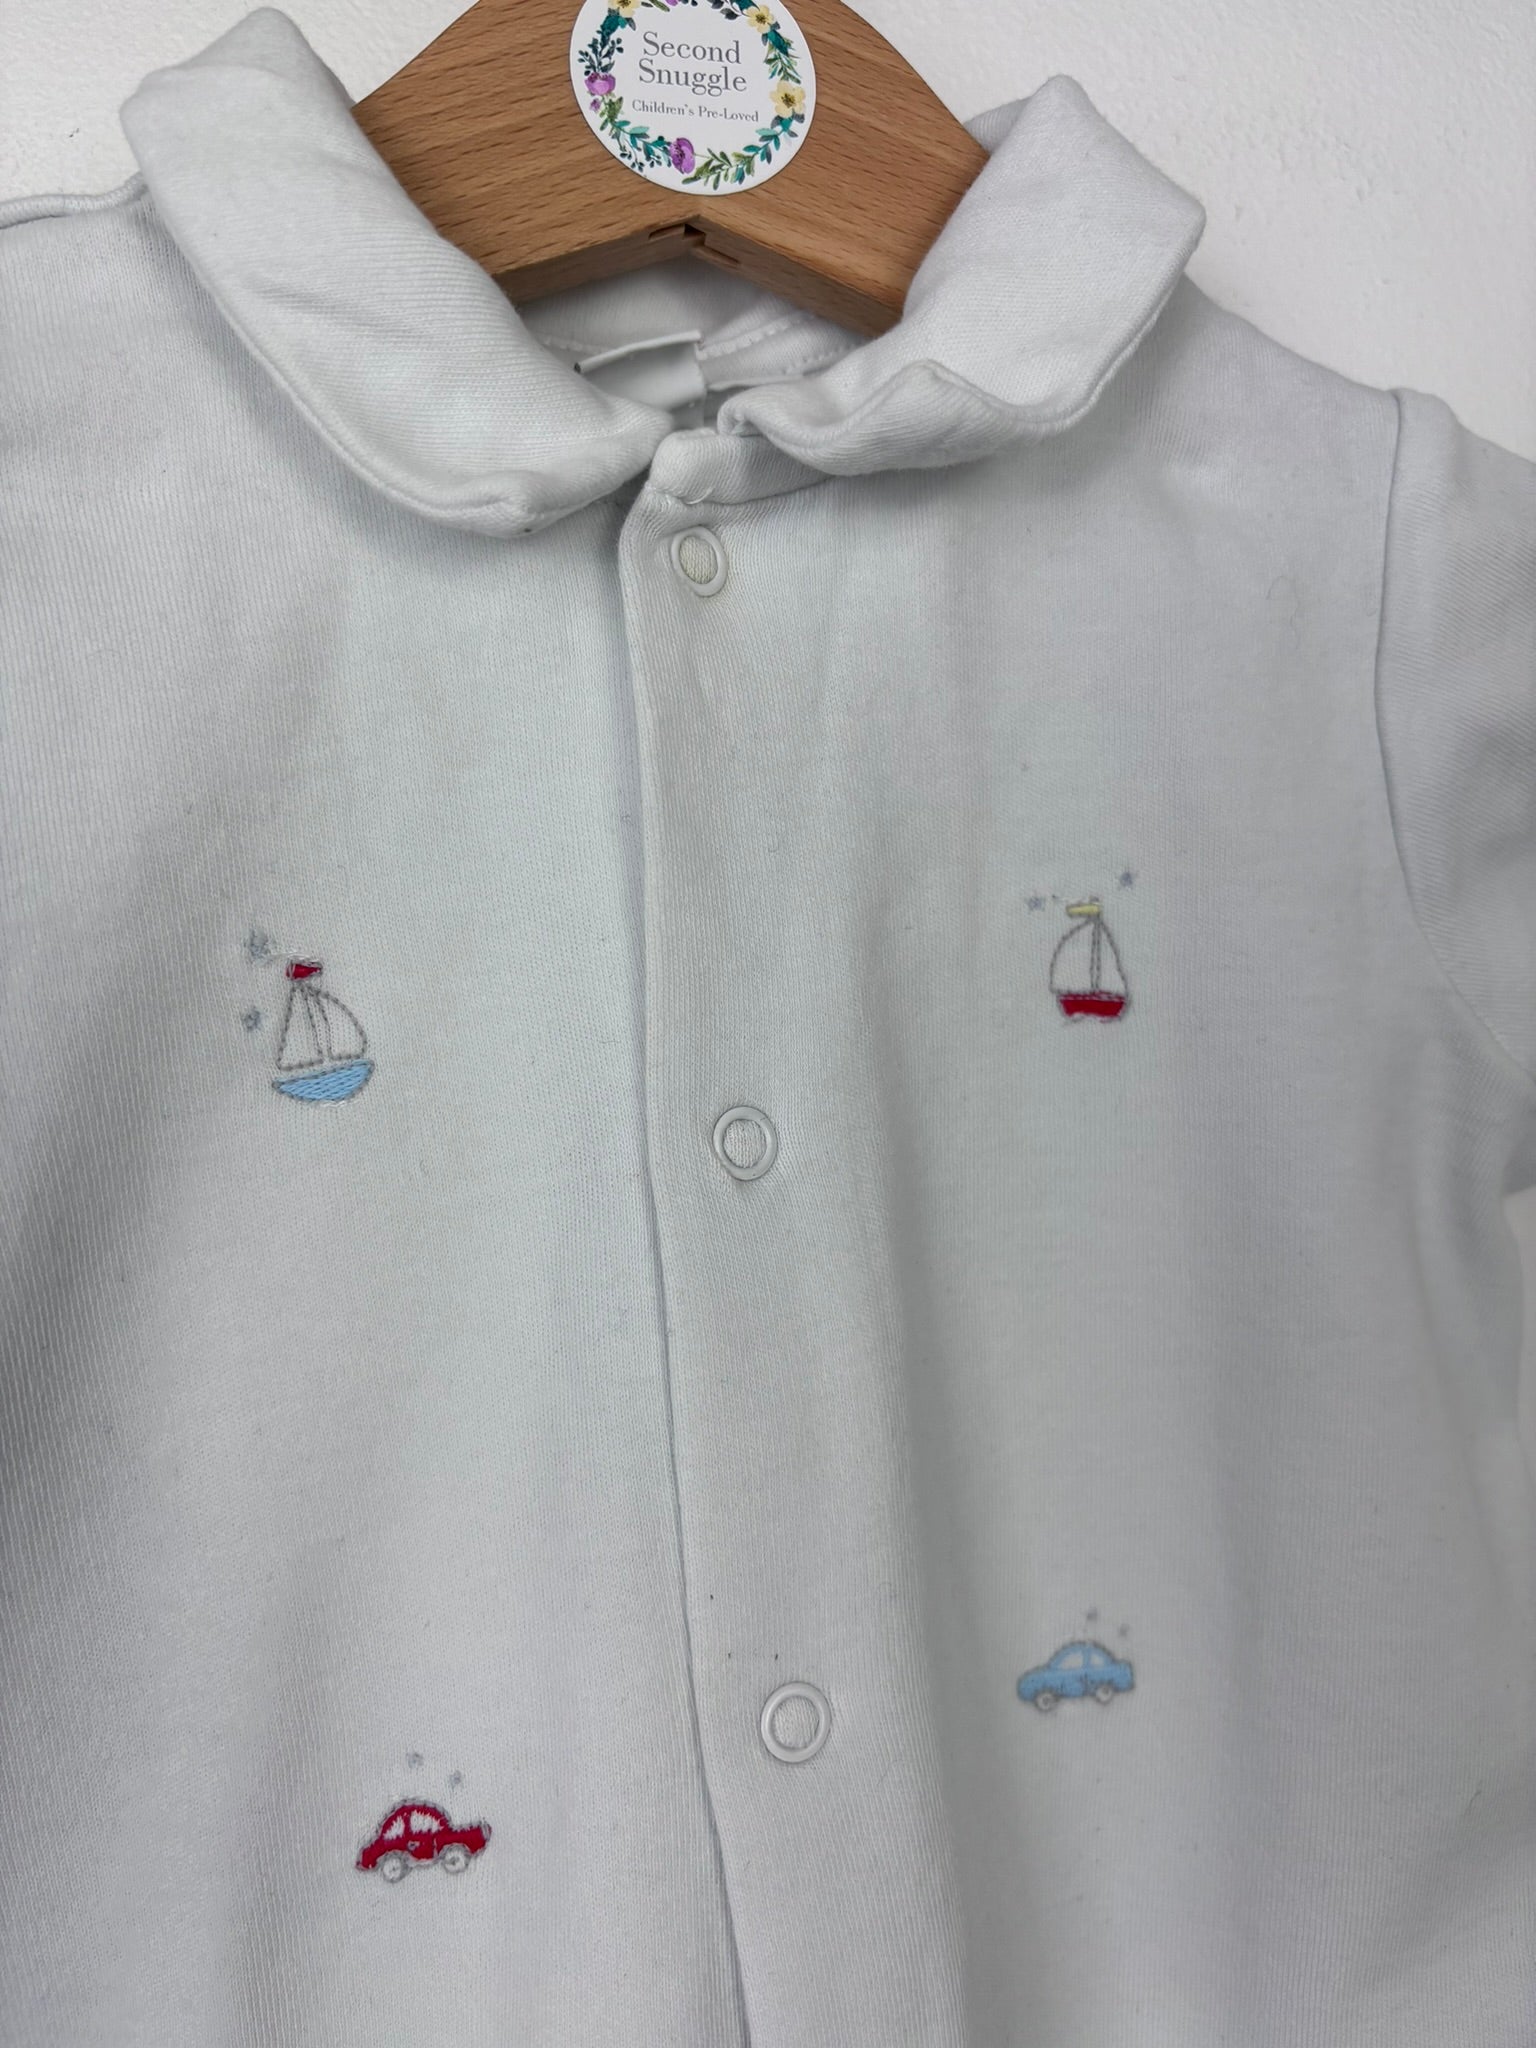 The Little White Company 6-9 Months-Rompers-Second Snuggle Preloved